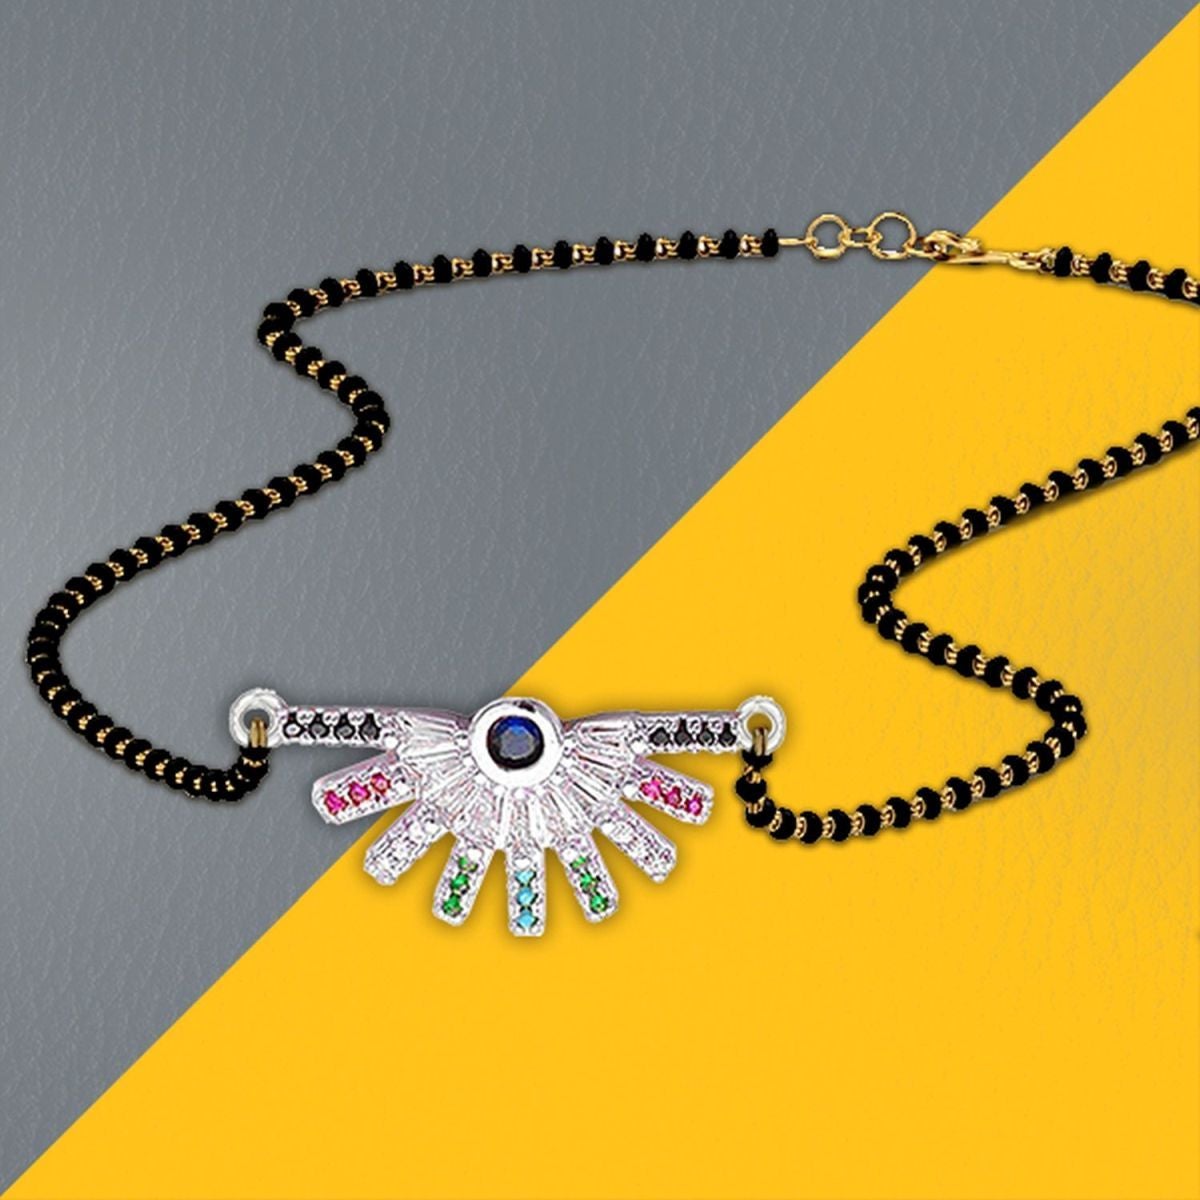 Stylish Delicate Rainbow Colourful Silver Mangalsutra Chain Necklace